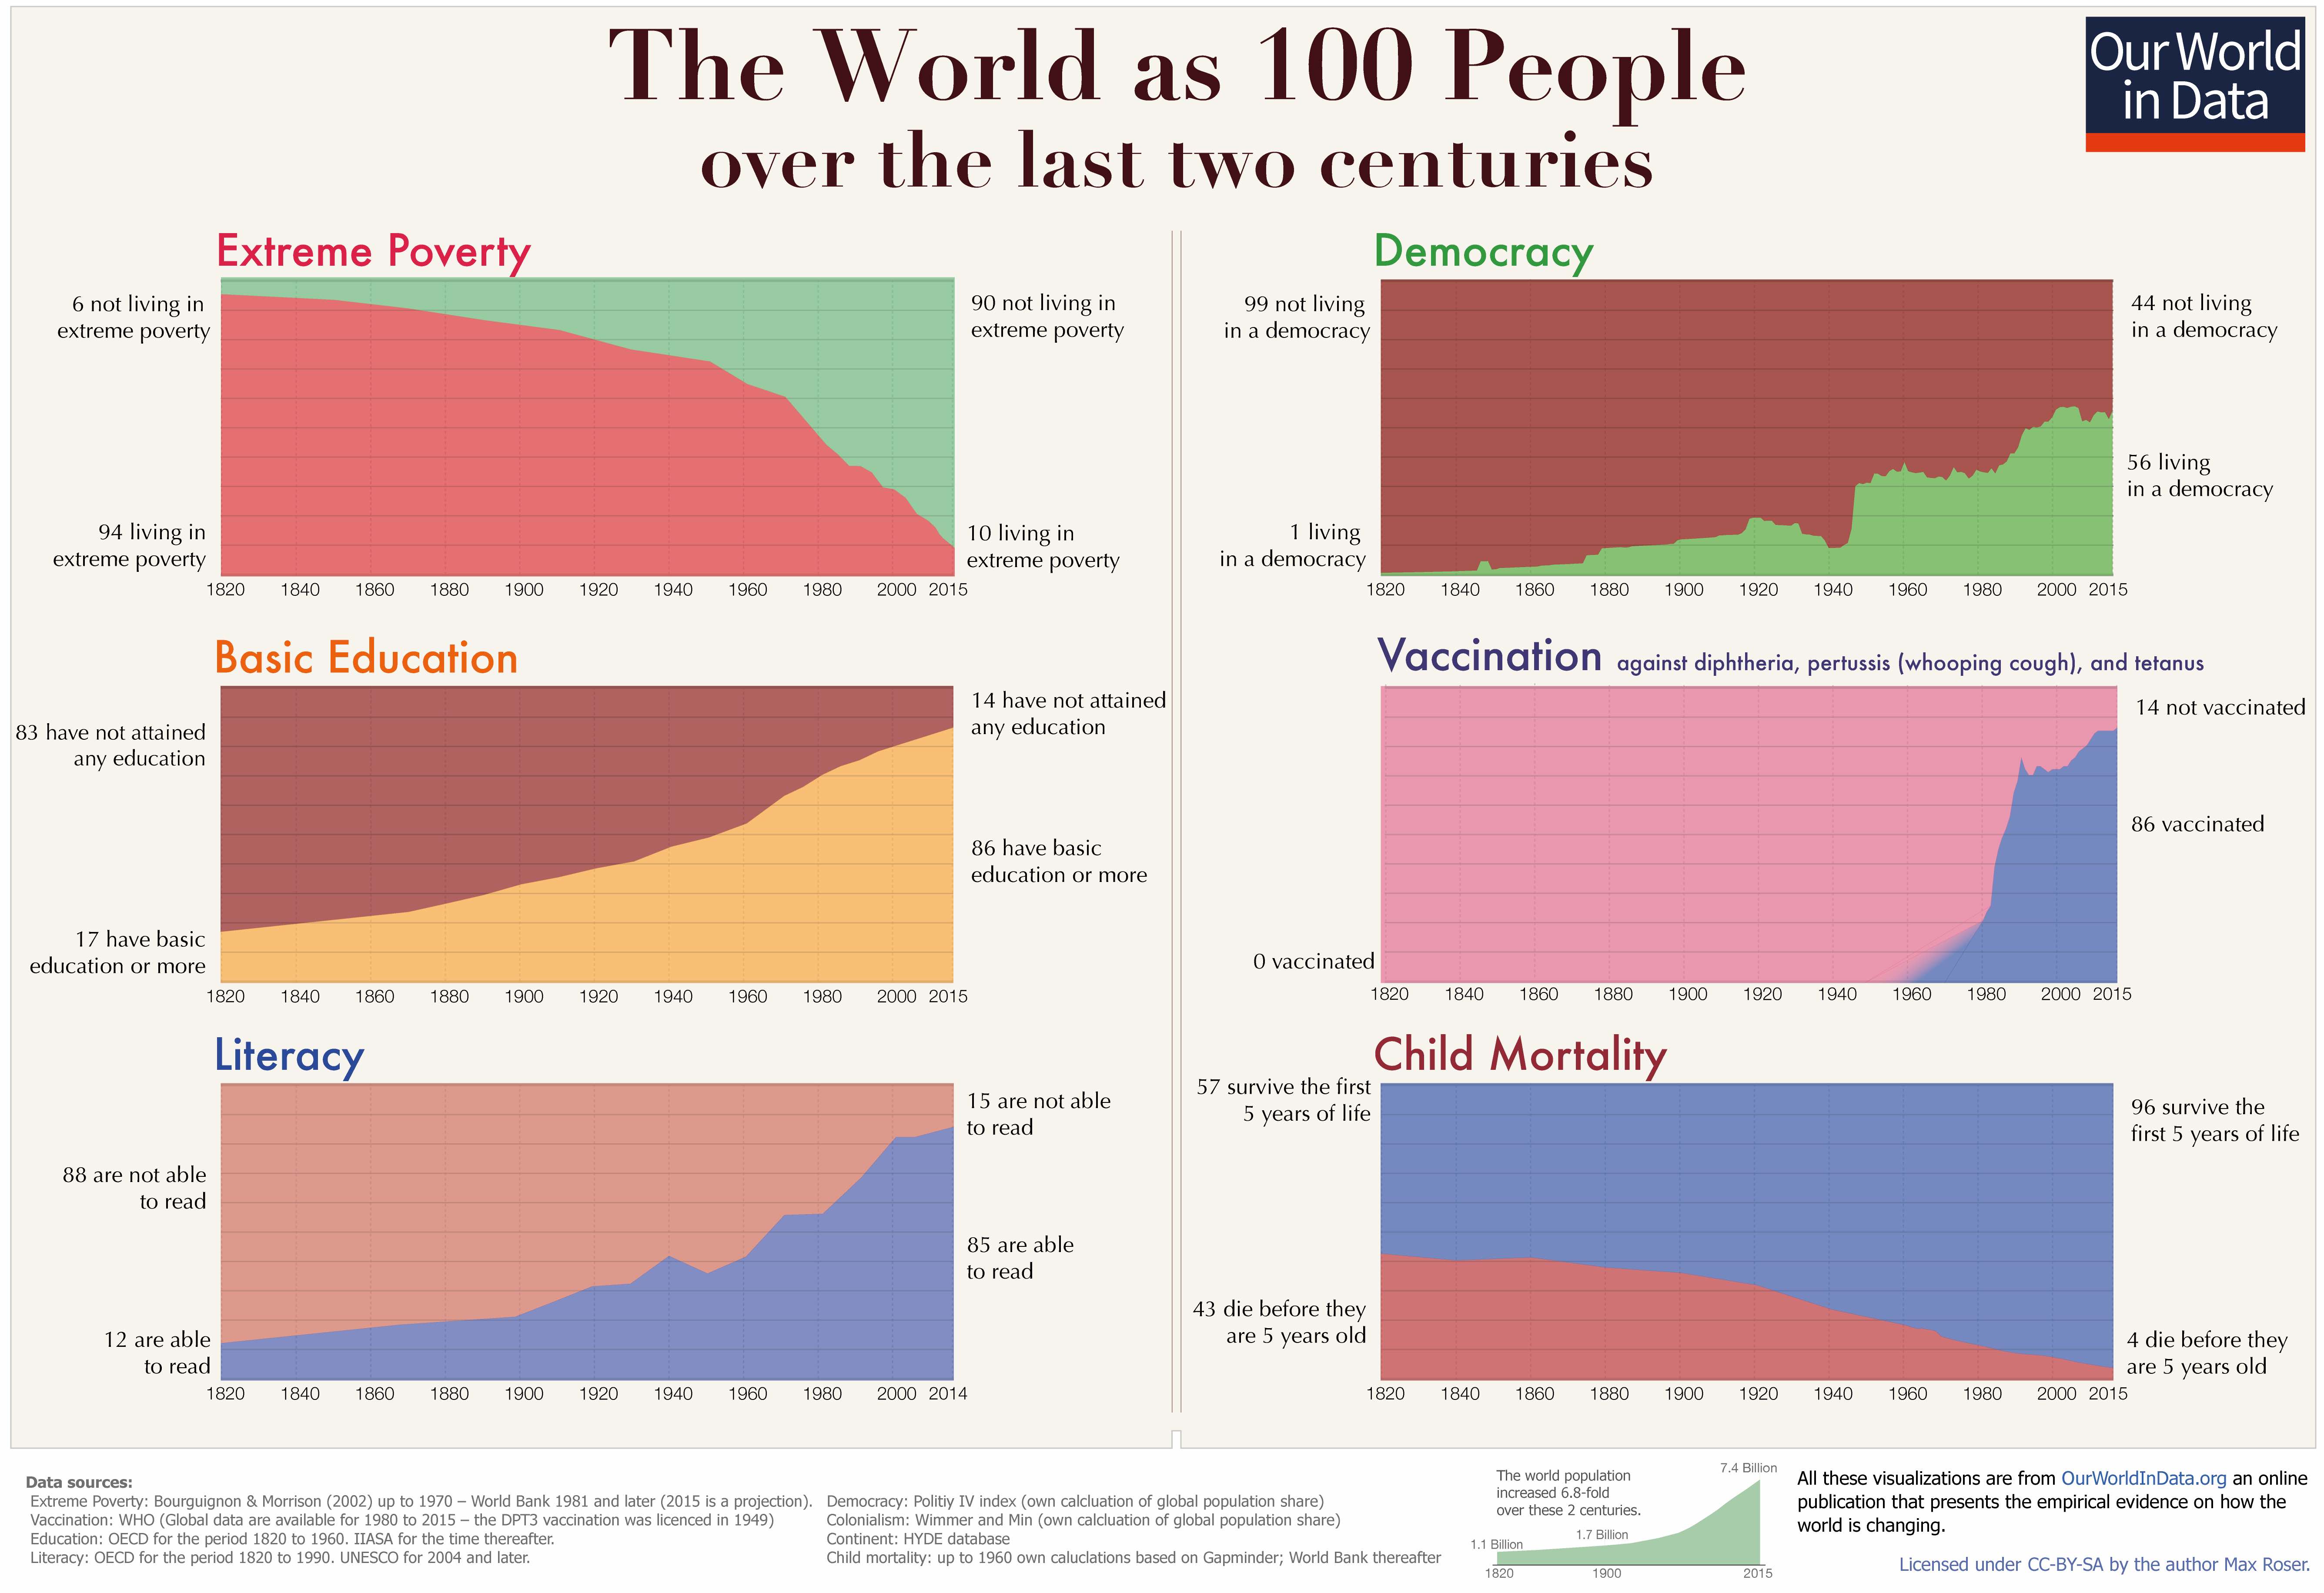 "The short history of global living conditions and why it matters that we know it" icon